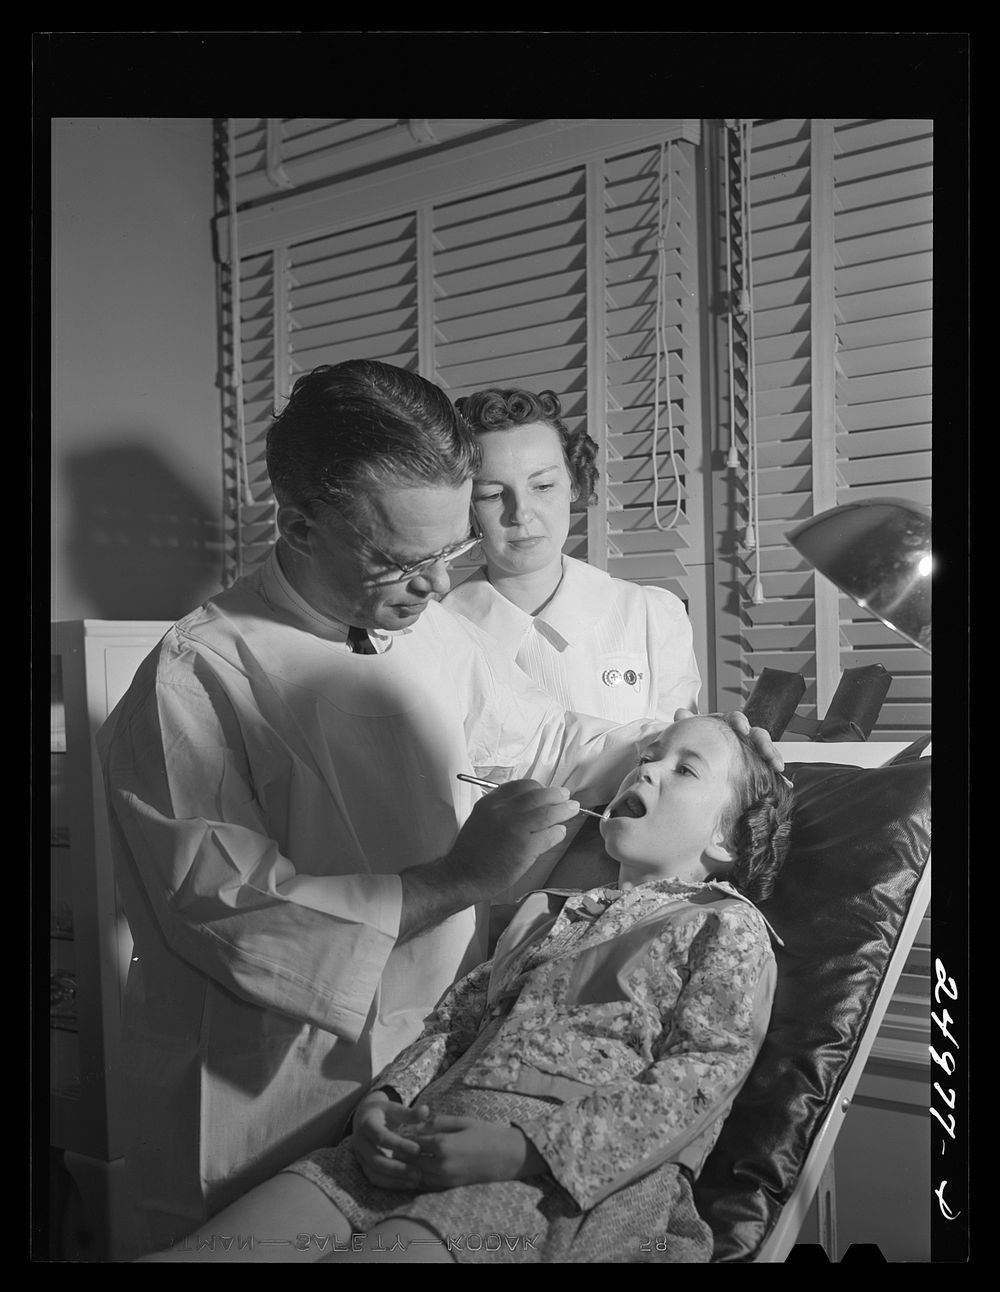 Weslaco, Texas. FSA (Farm Security Administration) camp. Dental clinic. Sourced from the Library of Congress.